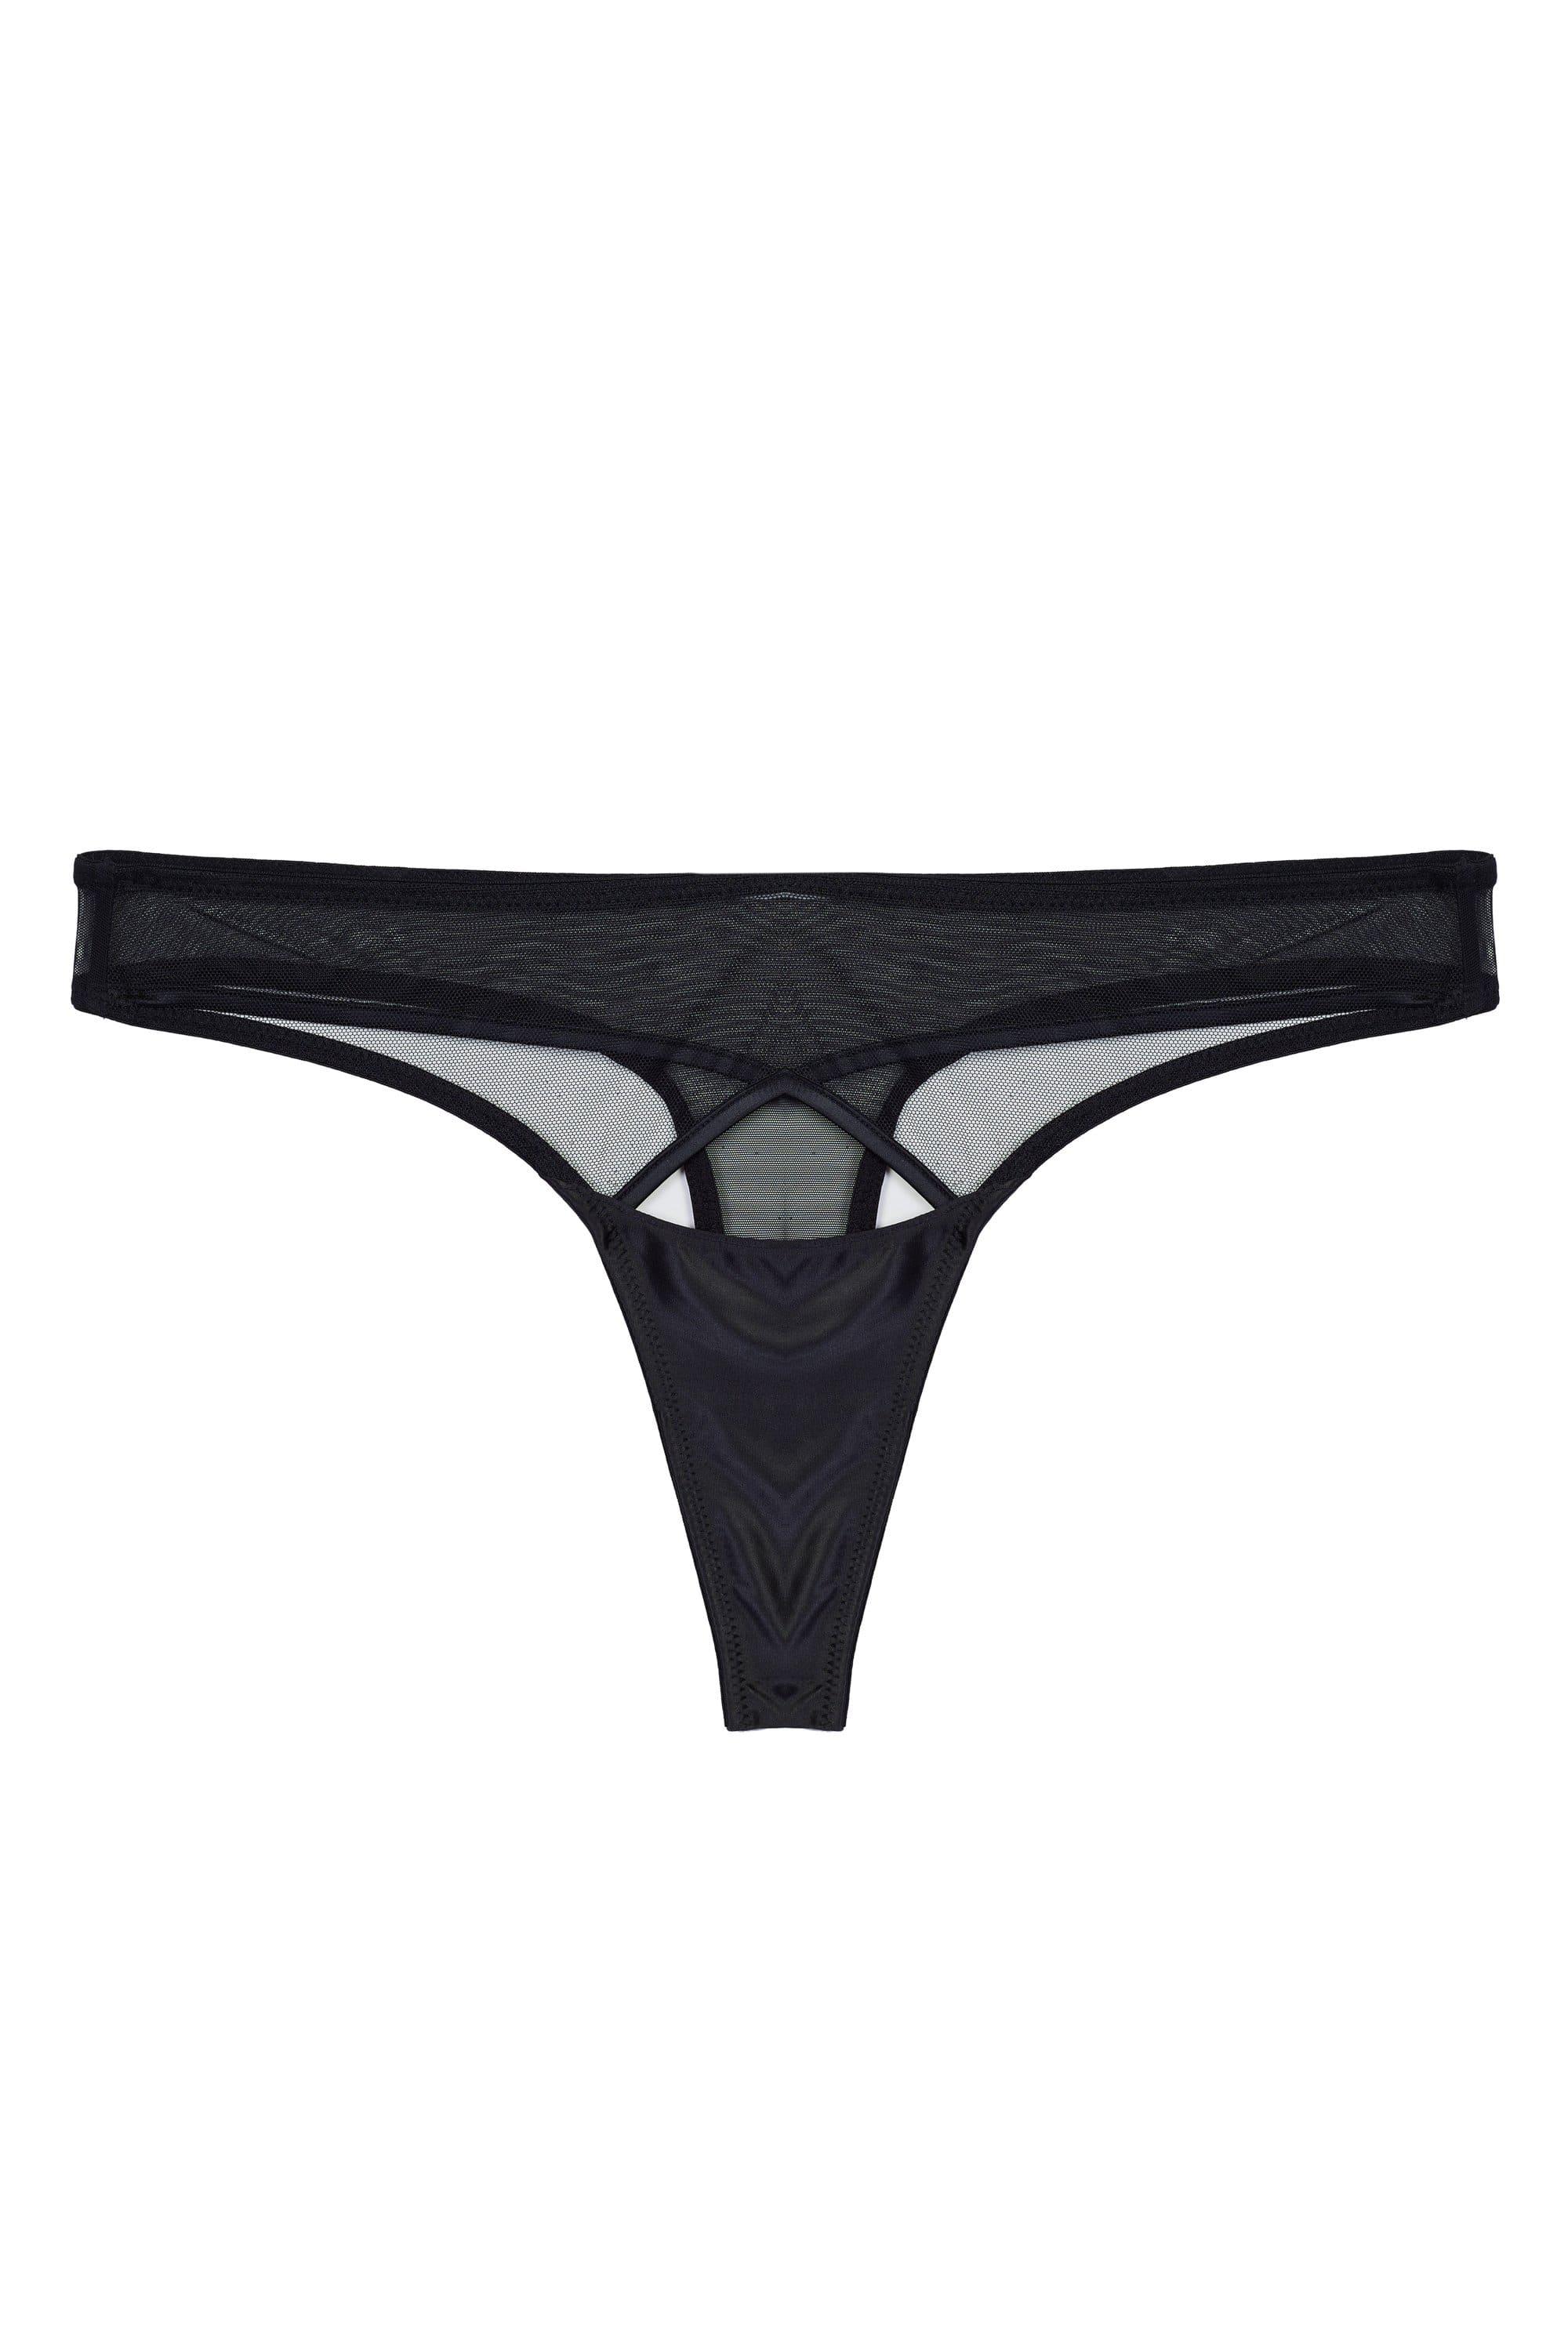 Charlie Black Cut-out Thong – Playful Promises